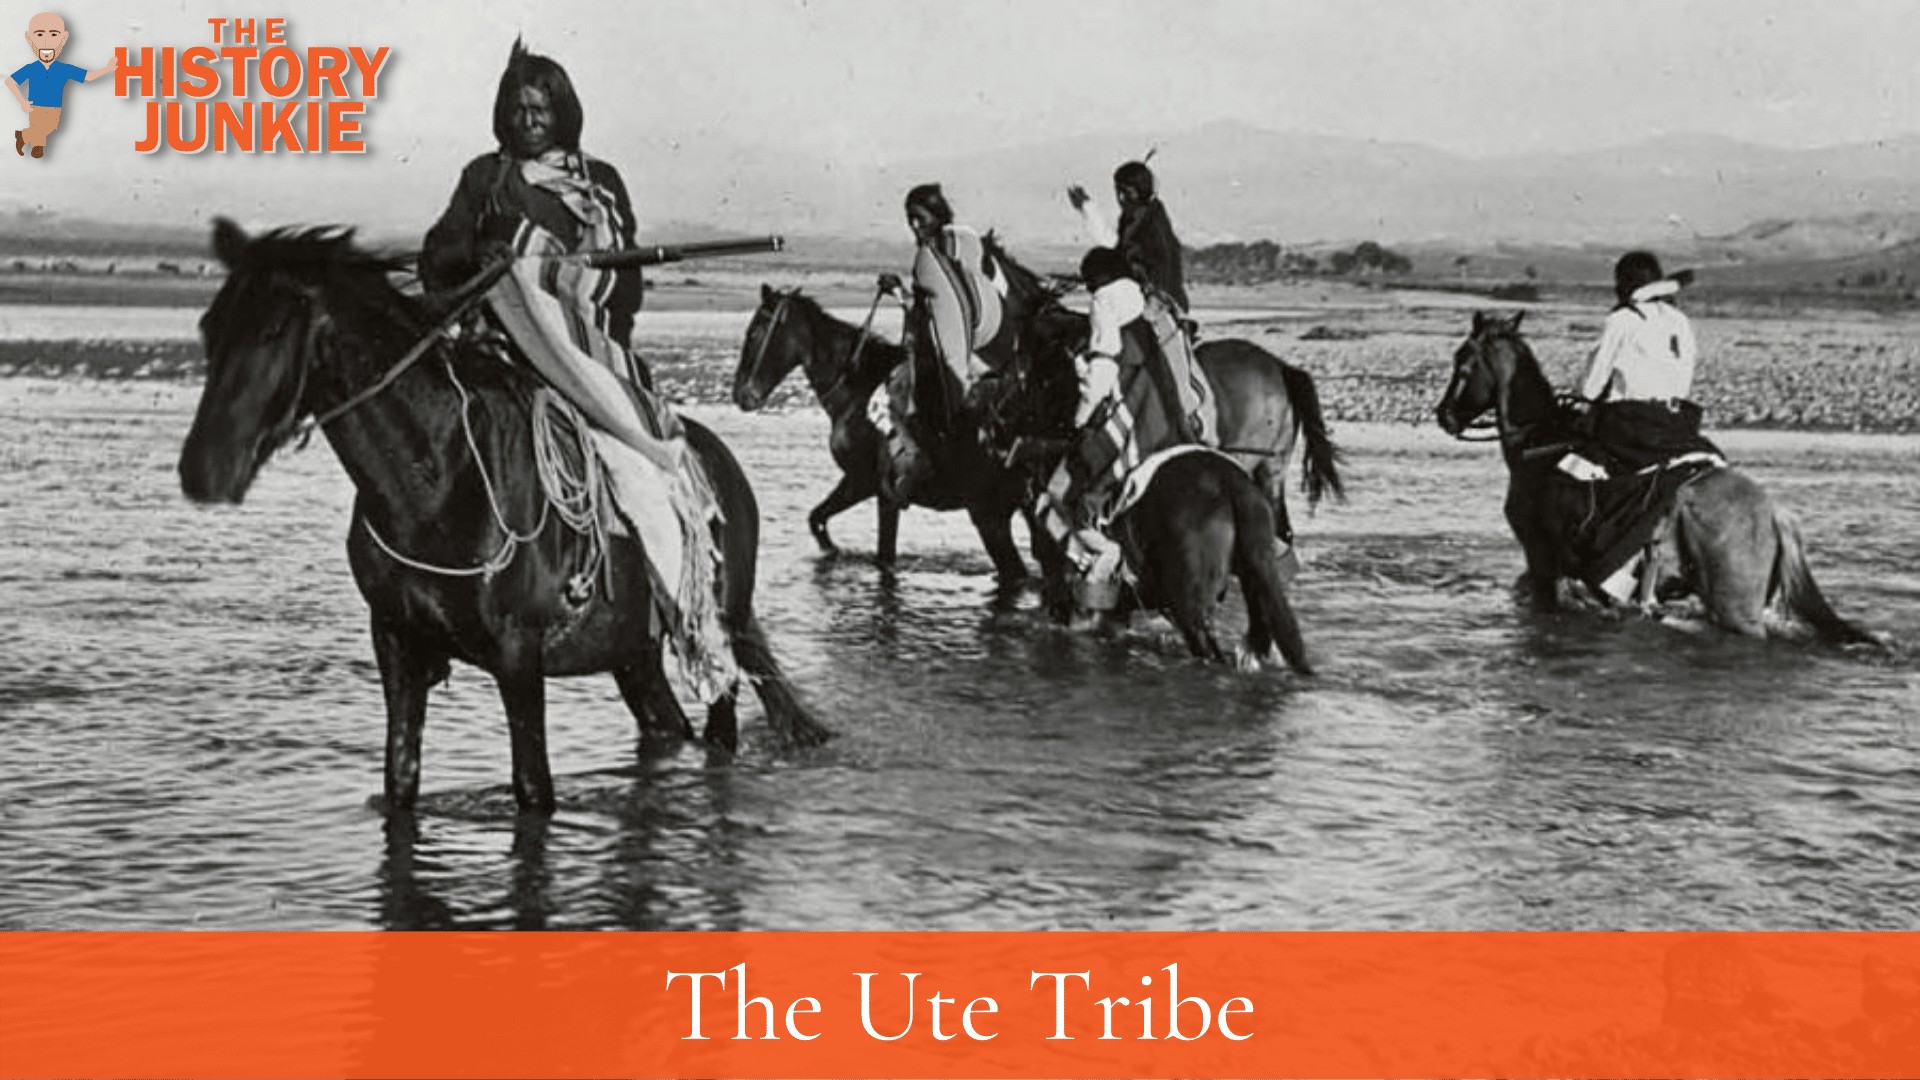 The Ute Tribe